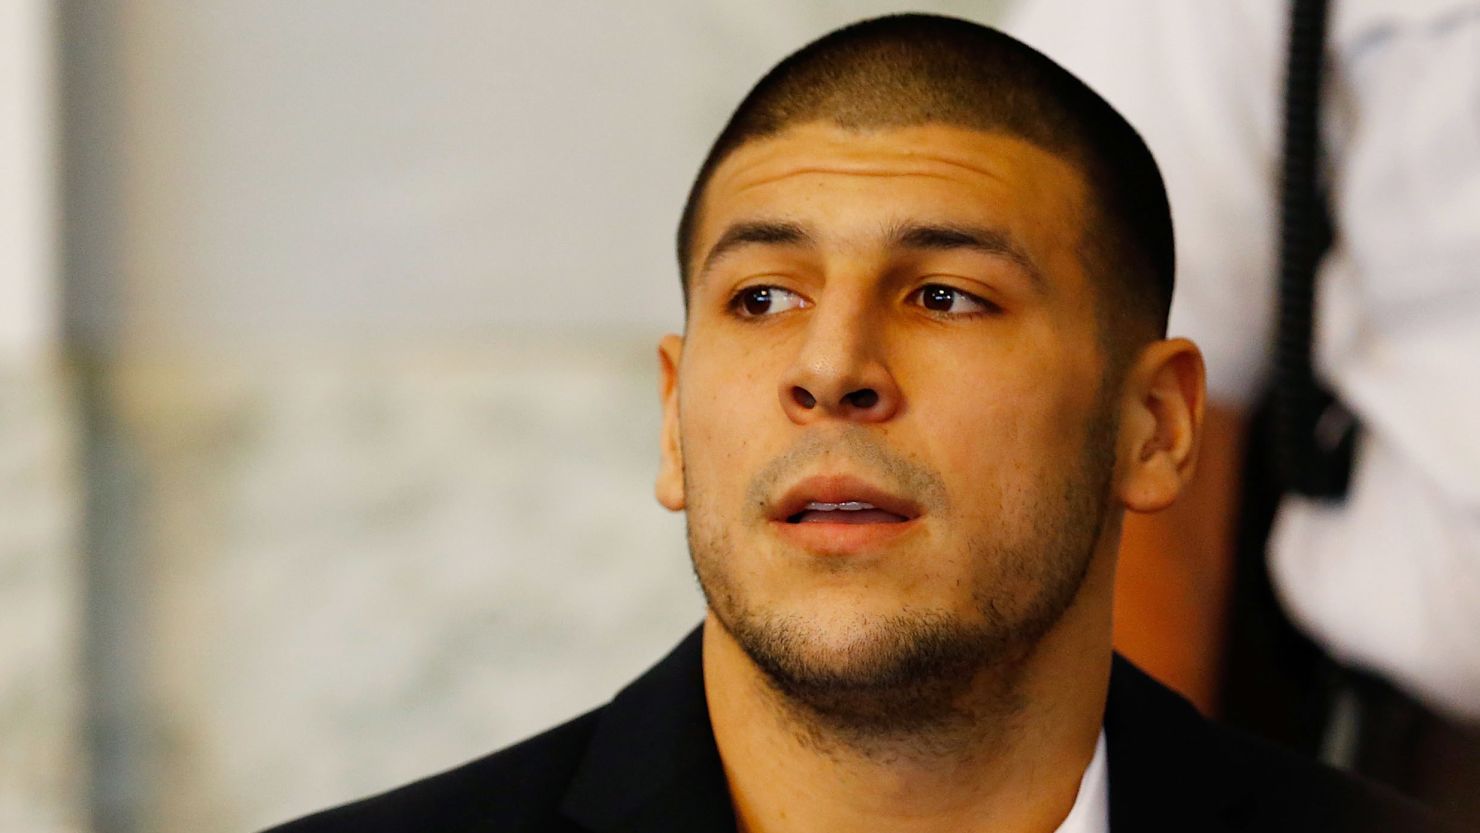 Aaron Hernandez, 24, has pleaded not guilty to a charge of first-degree murder.